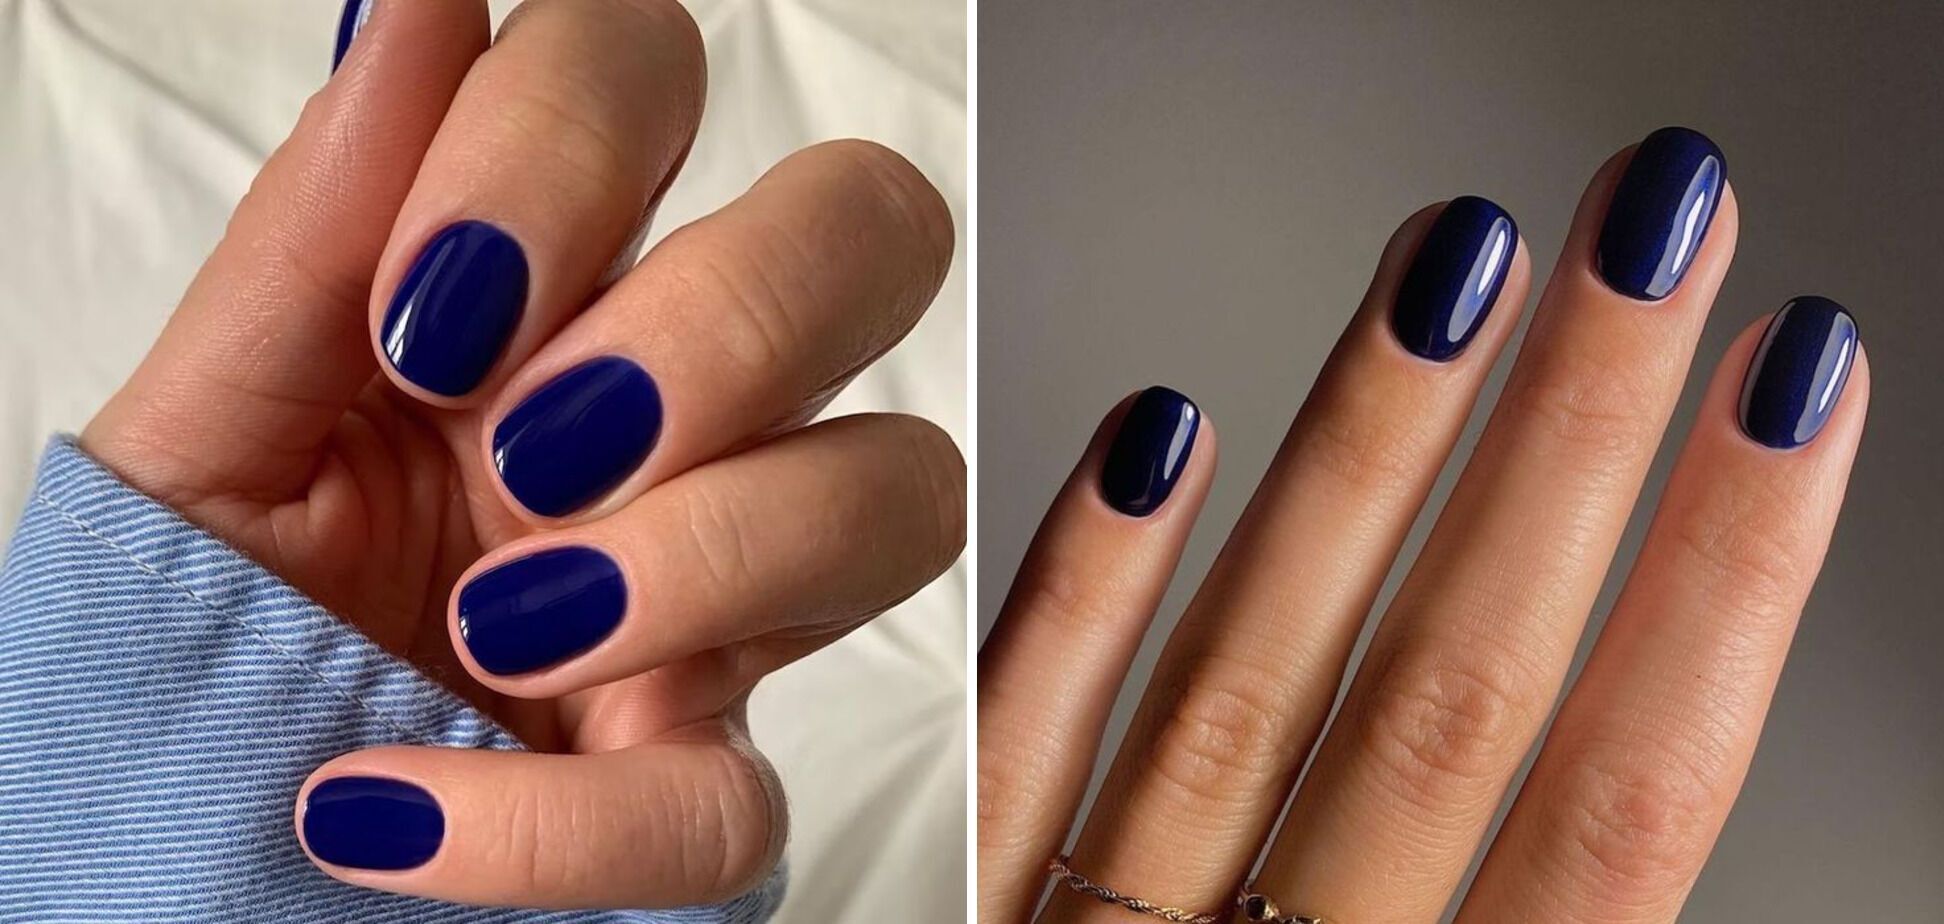 The perfect manicure for Christmas has been named: this color is considered an anti-trend, but it comes back into fashion every year